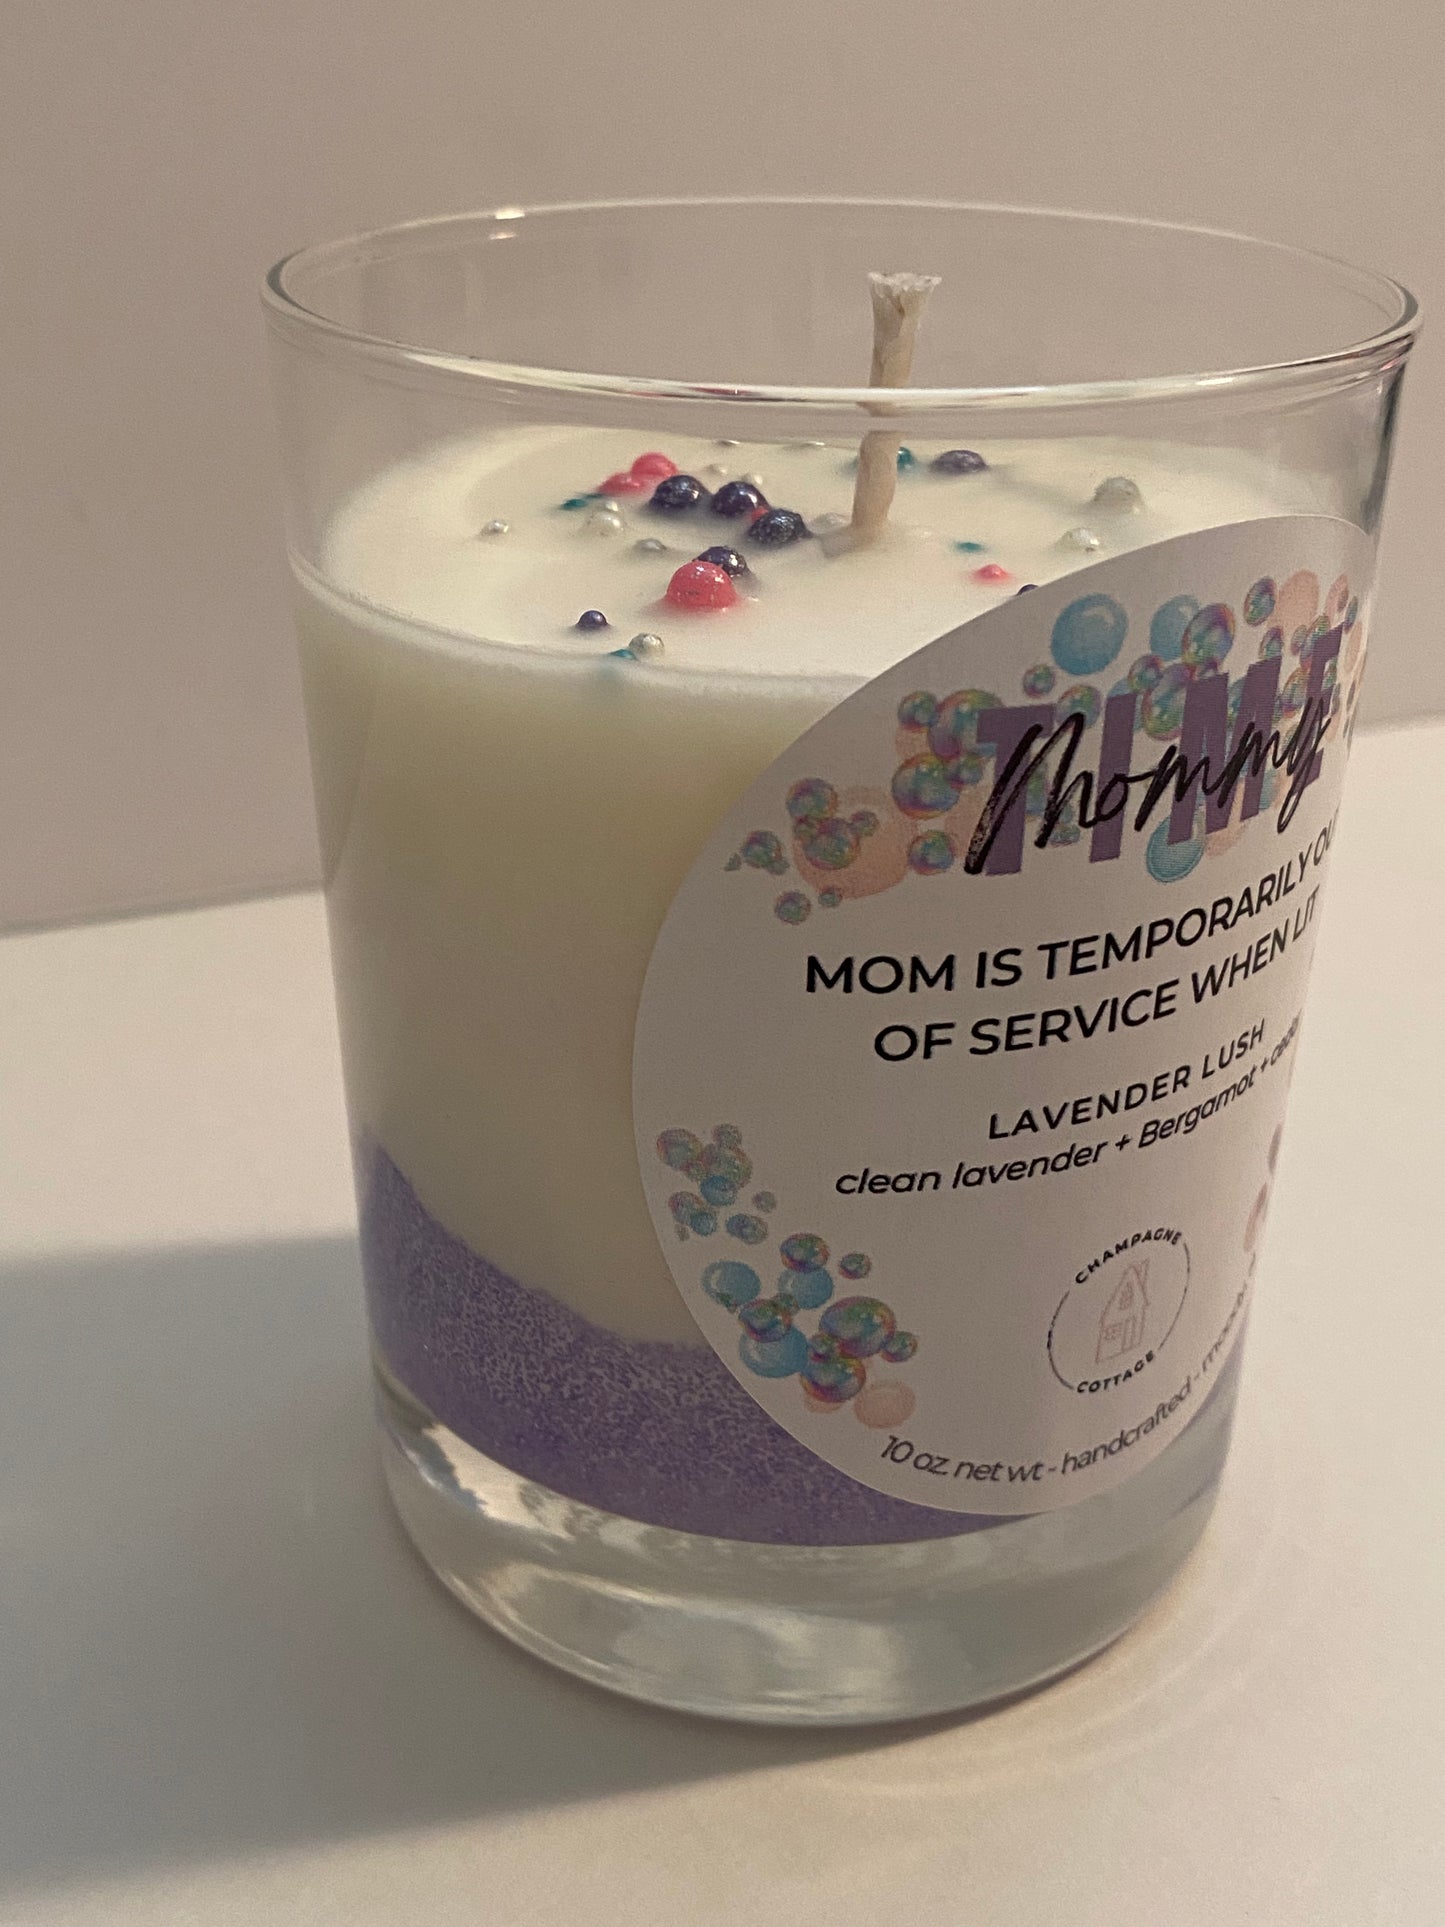 Lavender Lush (Mommy Time) Cheery Collection